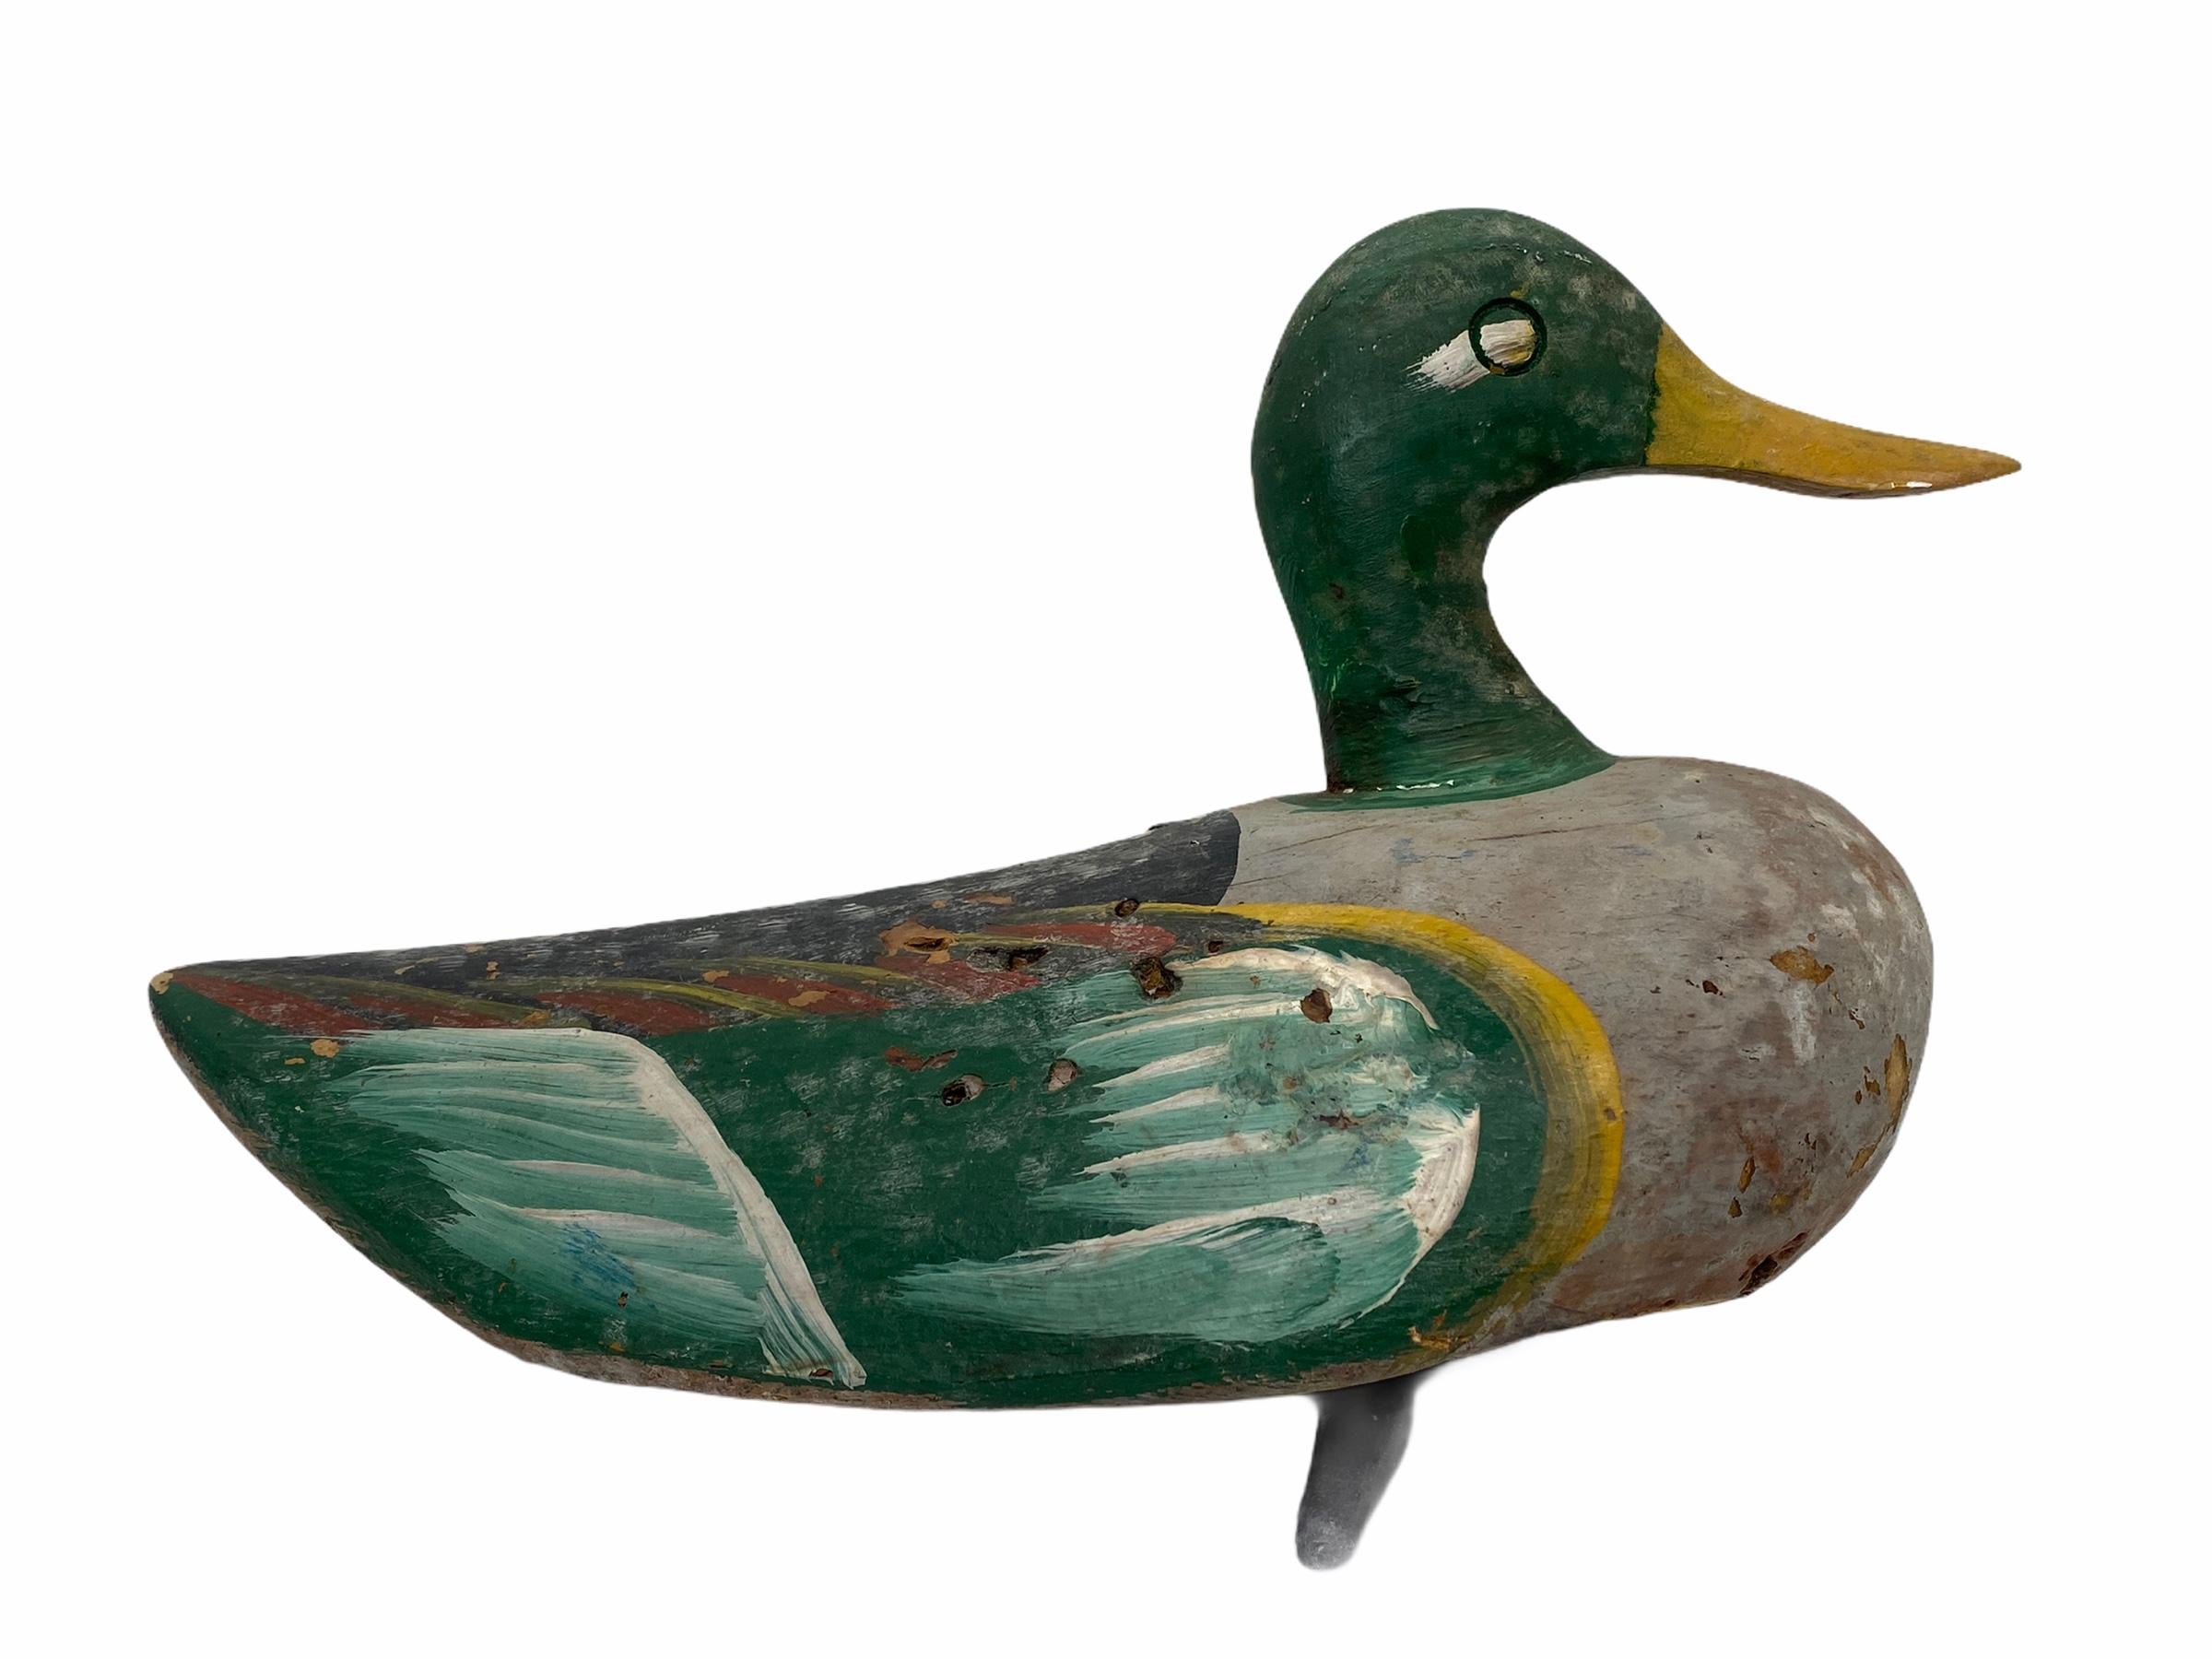 Found in Germany at an estate sale, this hand carved and hand painted duck decoy is perfect for the collector. Well used by a previous hunter the paint has faded through time although the original detail can be seen and admired. Nice folk art